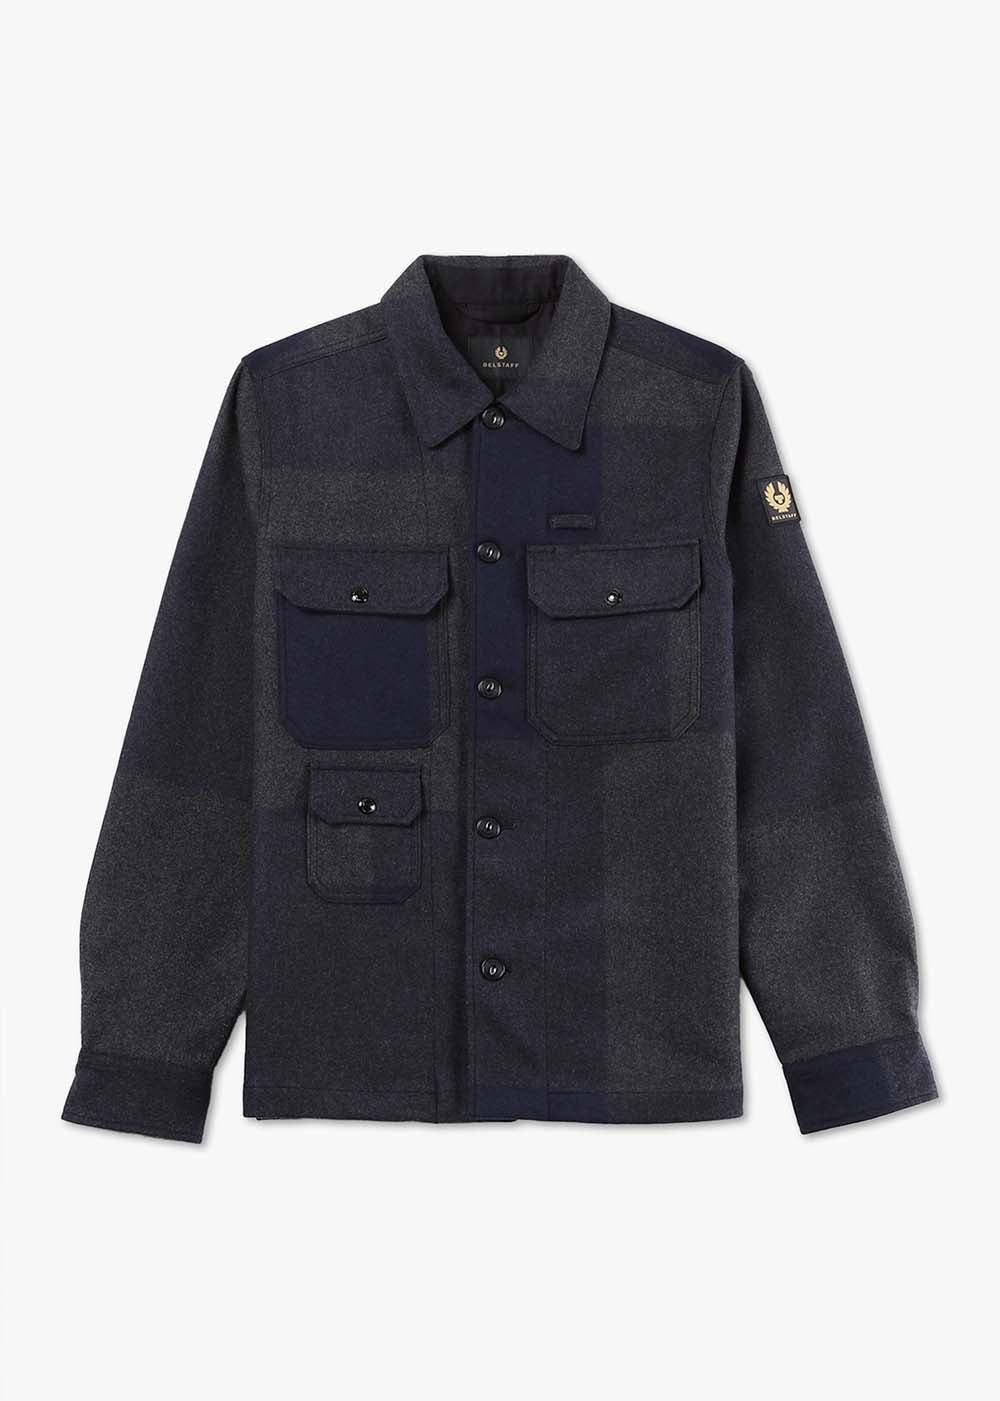 Image of Belstaff Mens Forge Overshirt In Navy/Charcoal